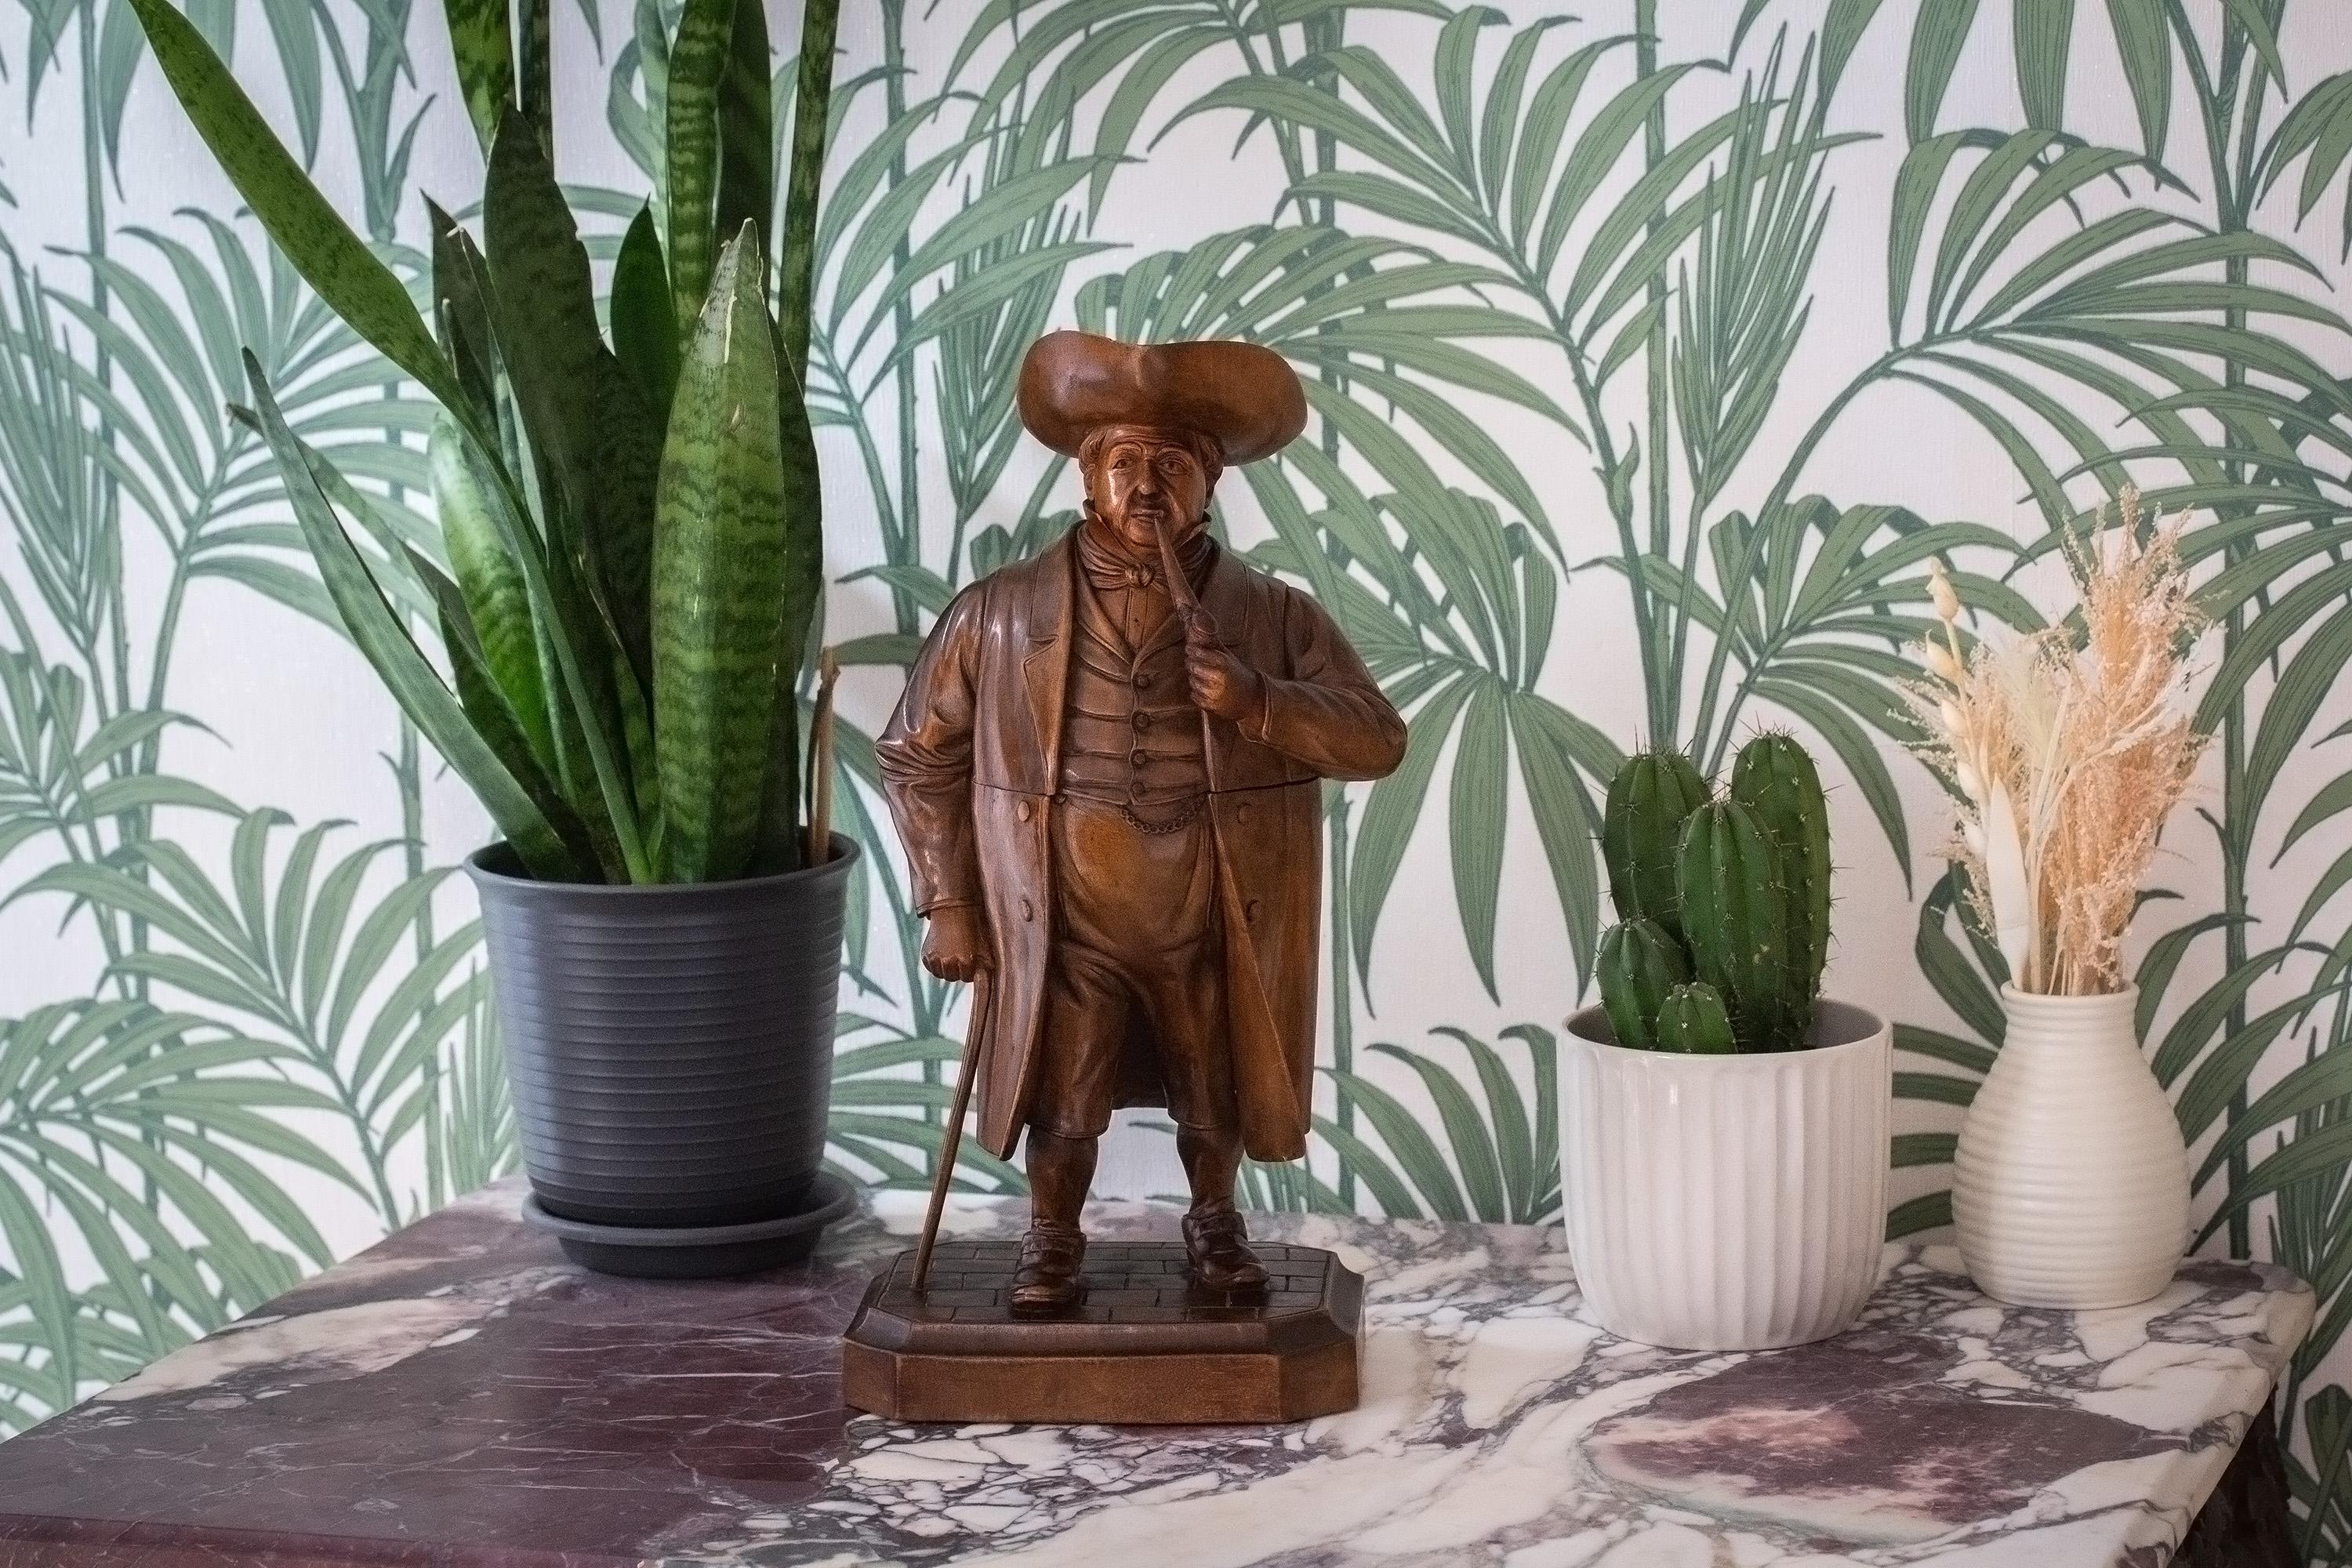 Fine and rare Swiss Black Forest carving of a Nobleman shaped as a tobacco jar. The rotund man stands proud with pipe in hand leaning on a walking cane dressed in high status attire. The carving is of exceptional detail showing the quality of the